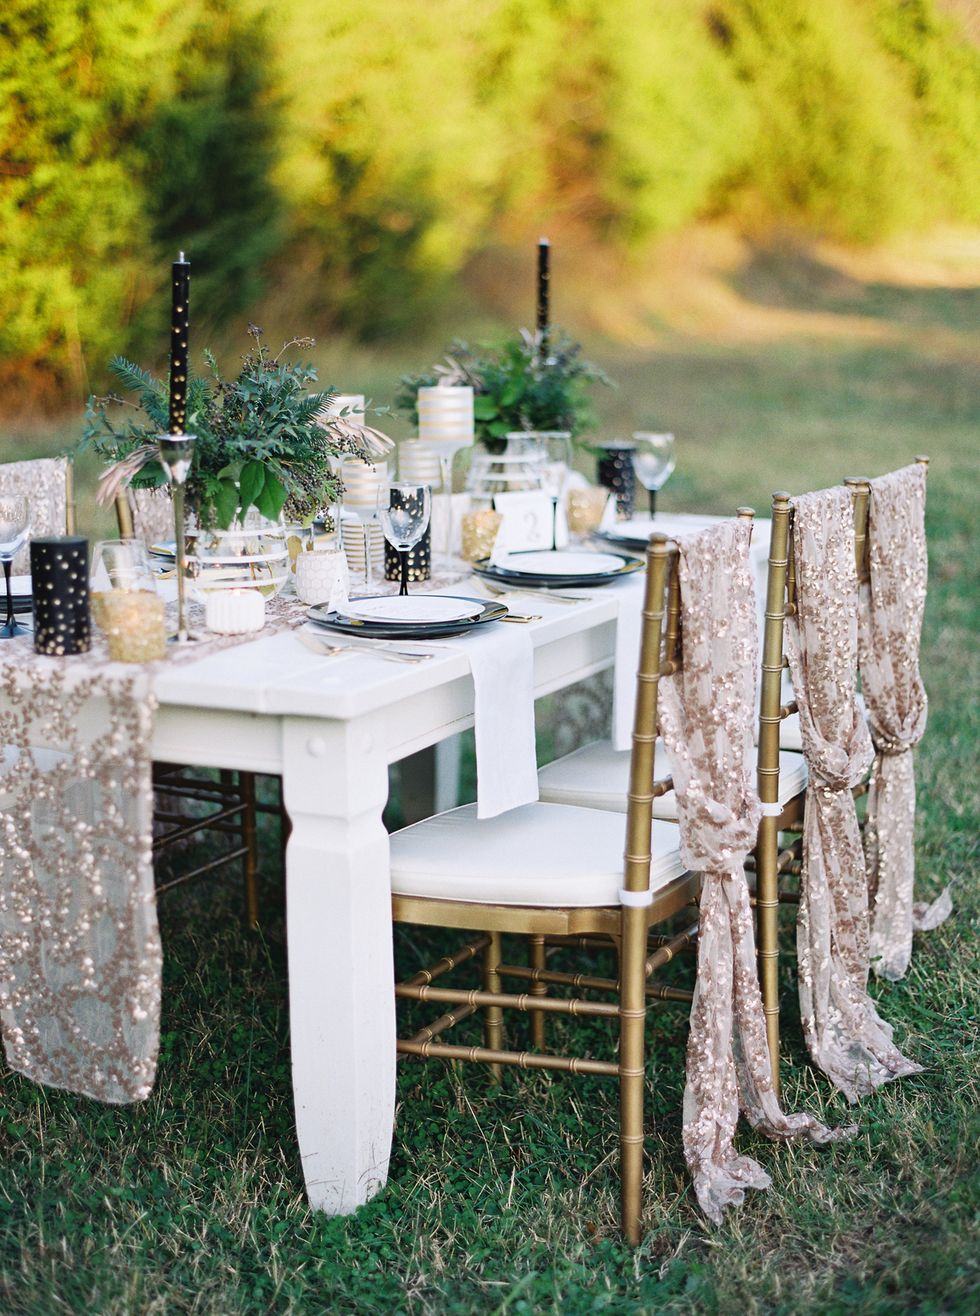 Tablecloth, Table, Furniture, Linens, Home accessories, Centrepiece, Outdoor table, Natural material, Outdoor furniture, Desk, 